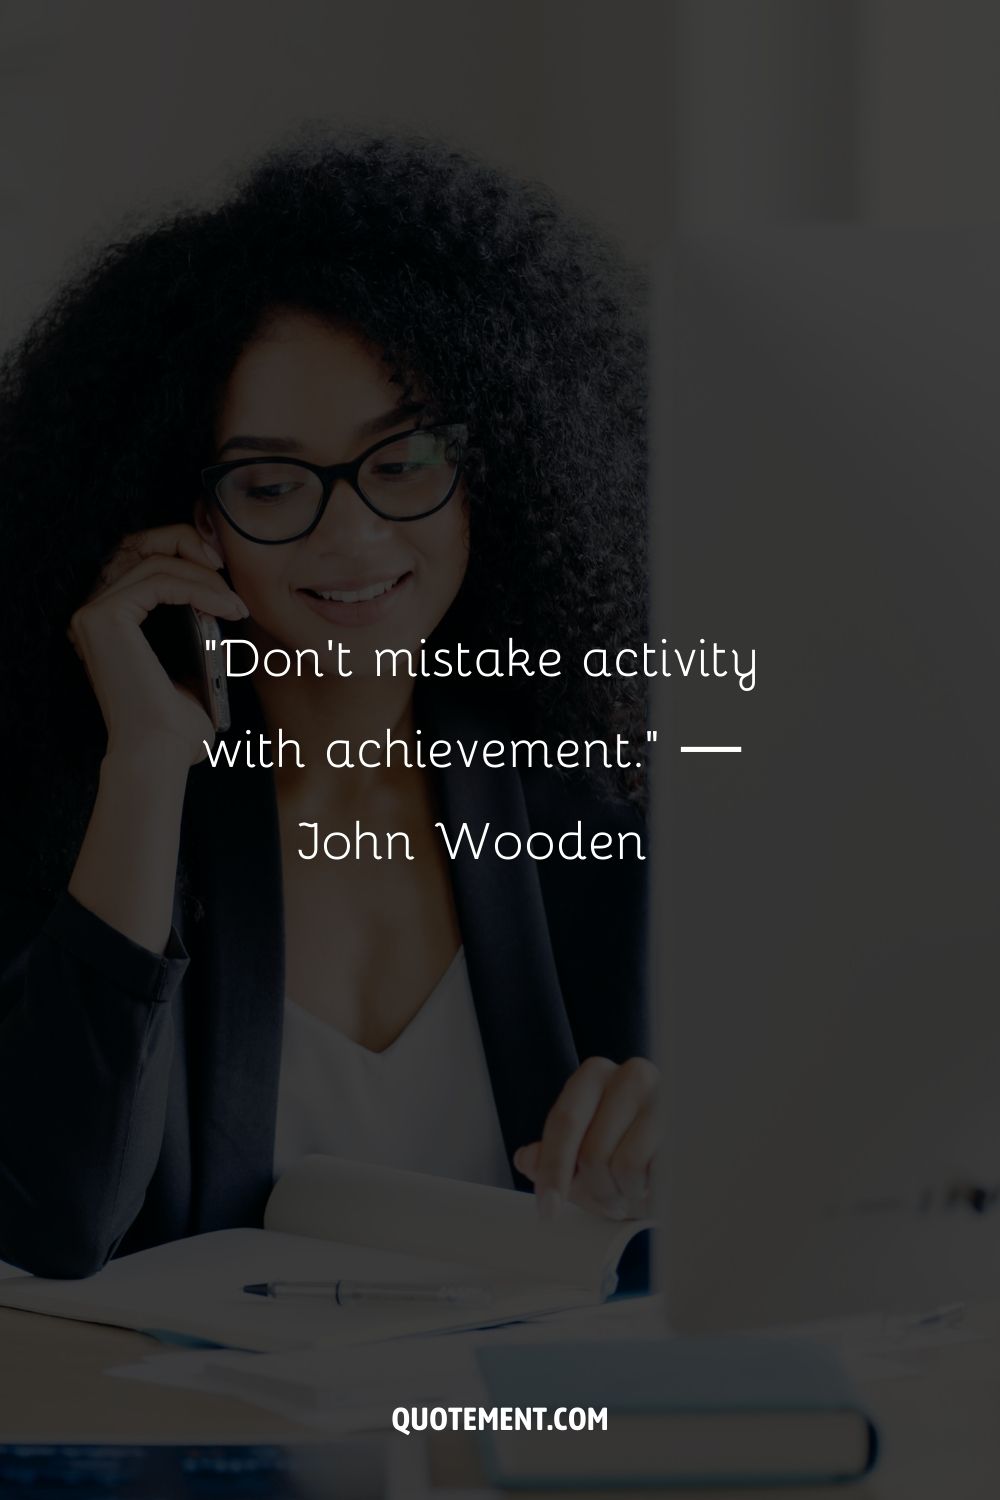 “Don't mistake activity with achievement.” ― John Wooden